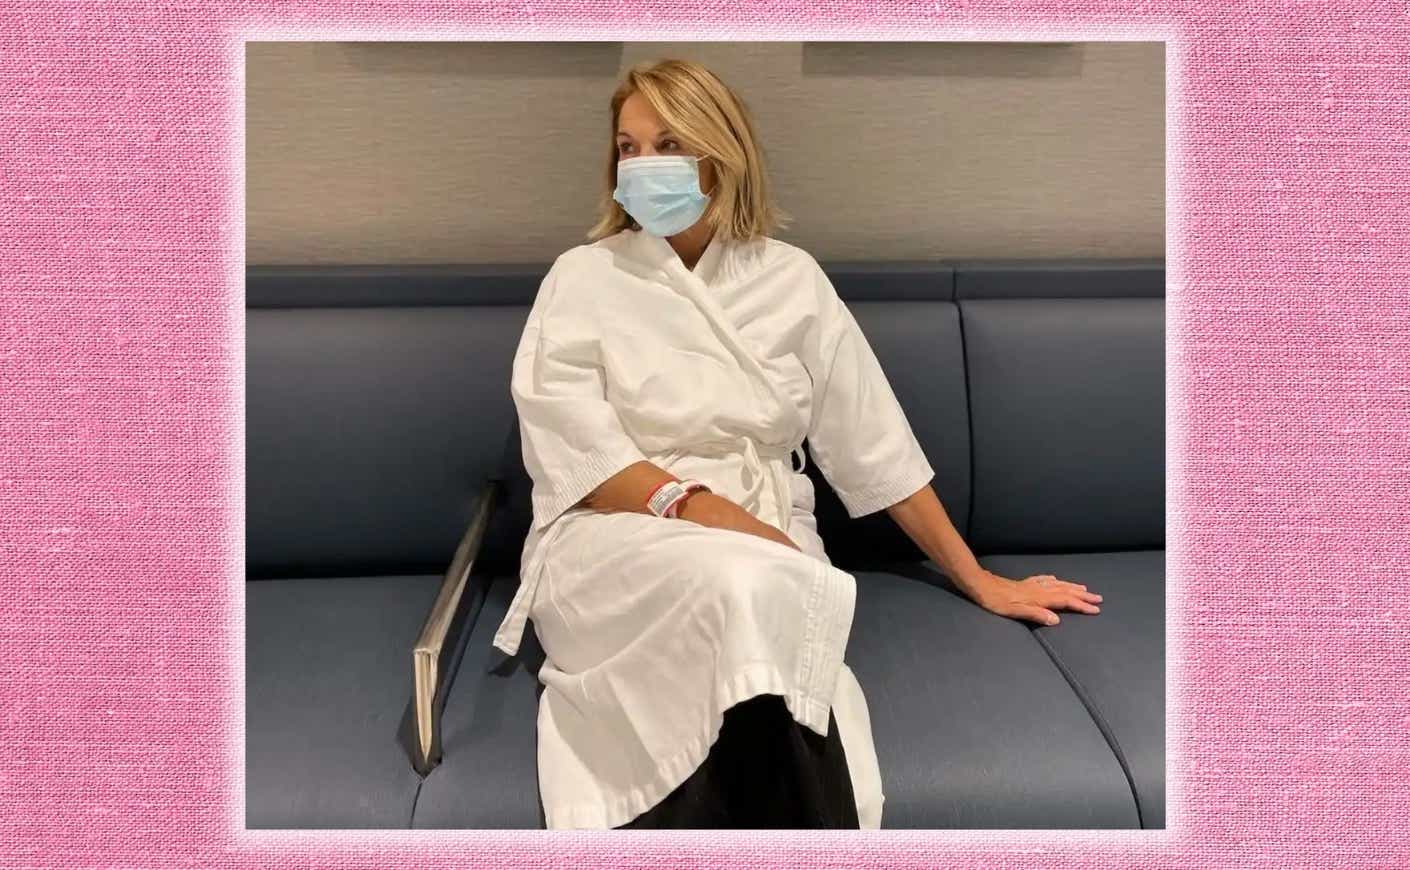 Katie Couric sits in a hospital wearing a face mask and white robe.